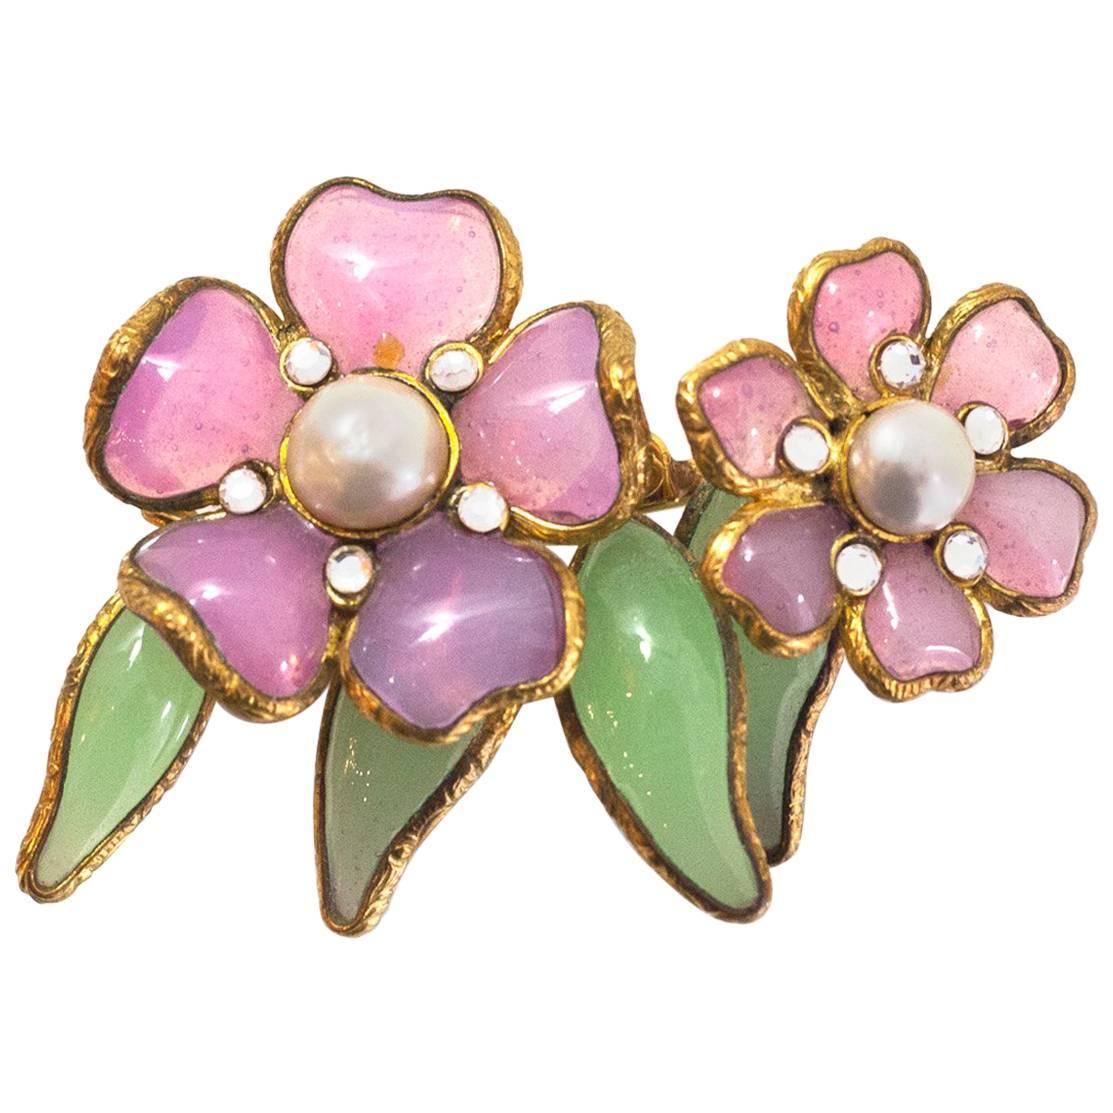 RESERVED - Chanel Gripoix Camelia Earrings & Vintage Brooch 60s